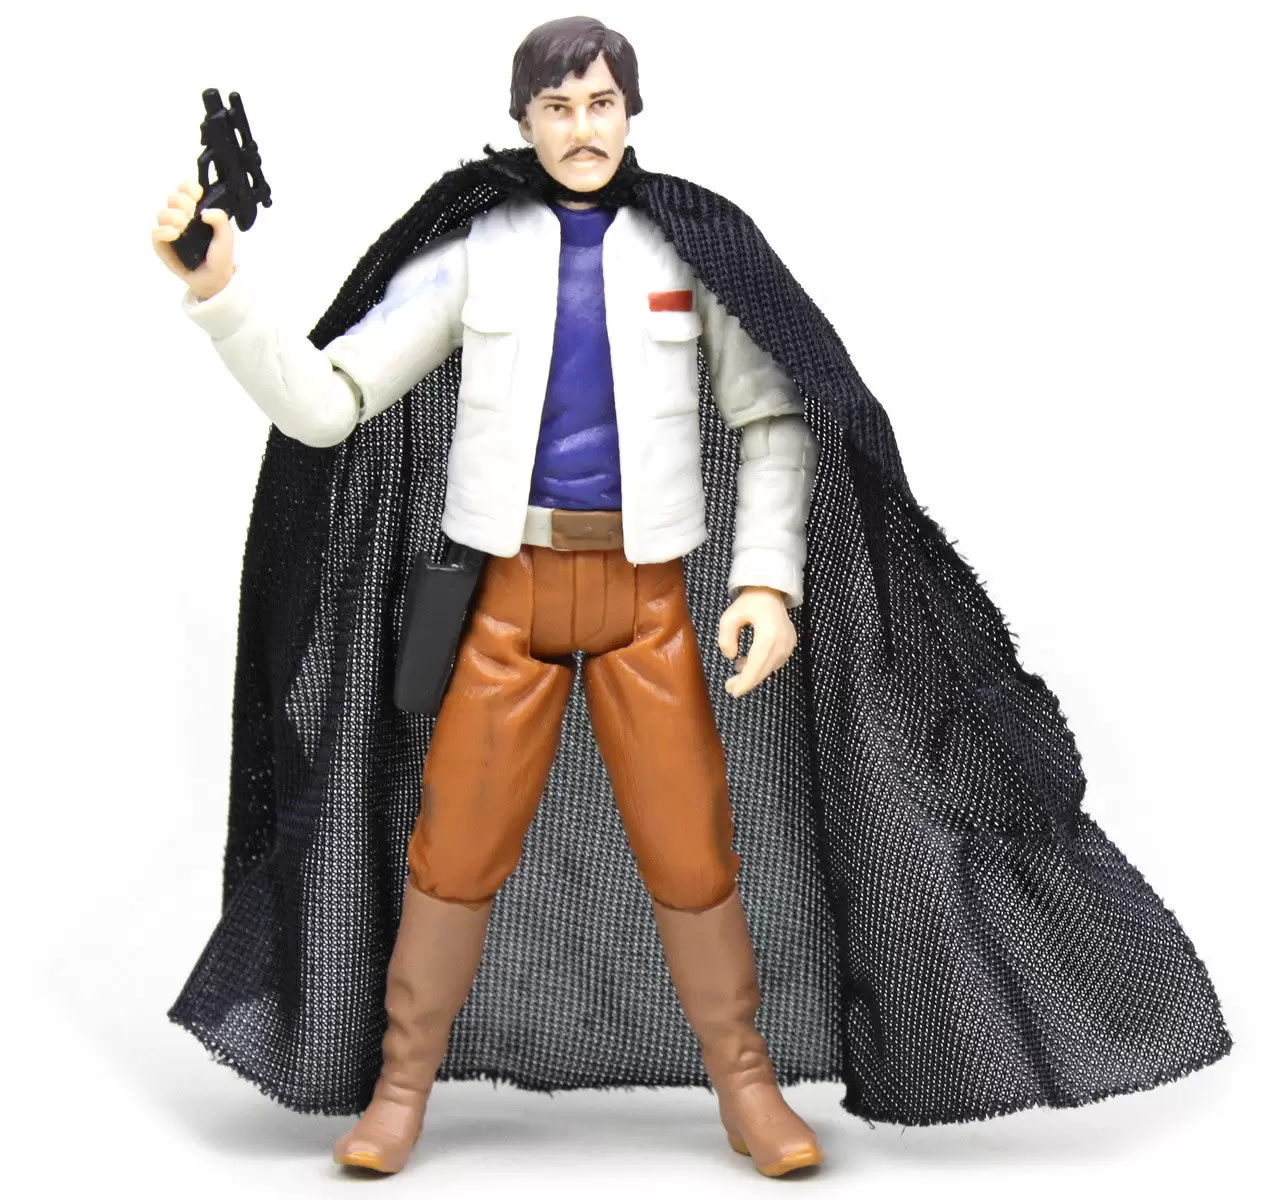 30th Anniversary Collection (TAC) - Biggs Darklighter (Academy Outfit)